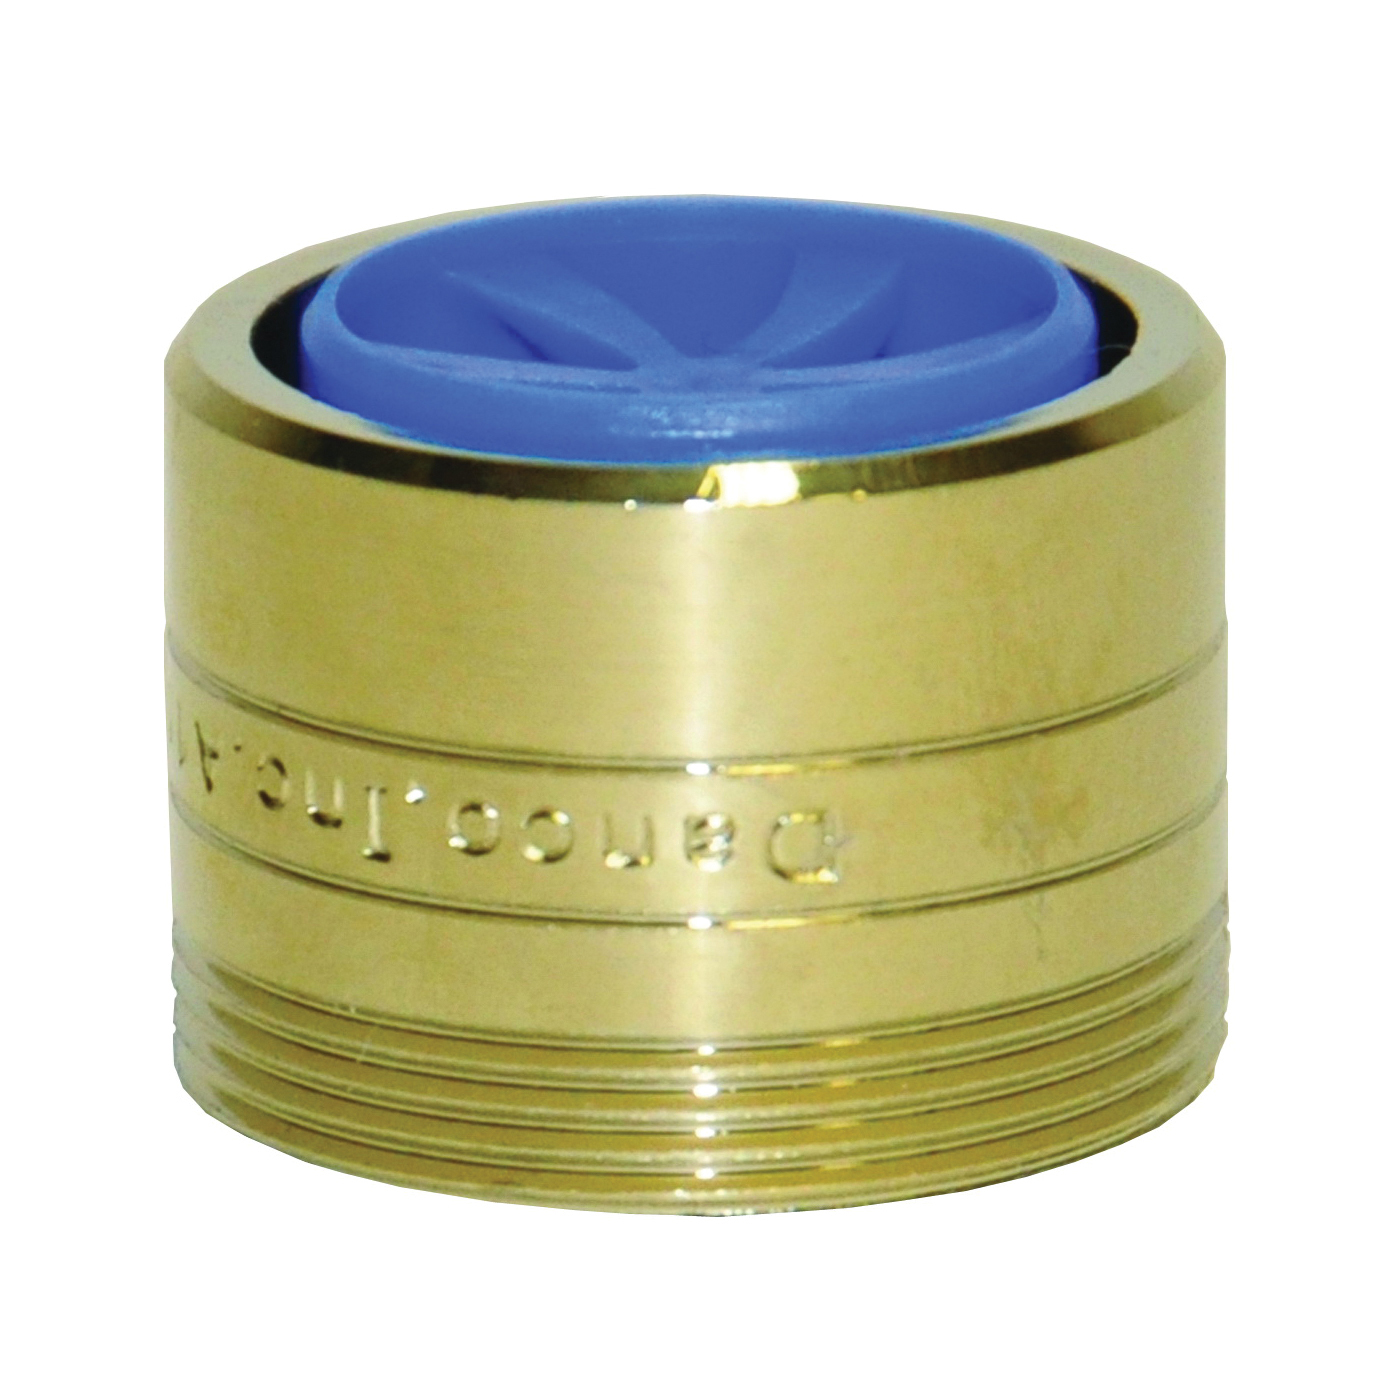 10478 Faucet Aerator, 15/16-27 x 55/64-27 Male x Female Thread, Brass, Polished Brass, 1.5 gpm